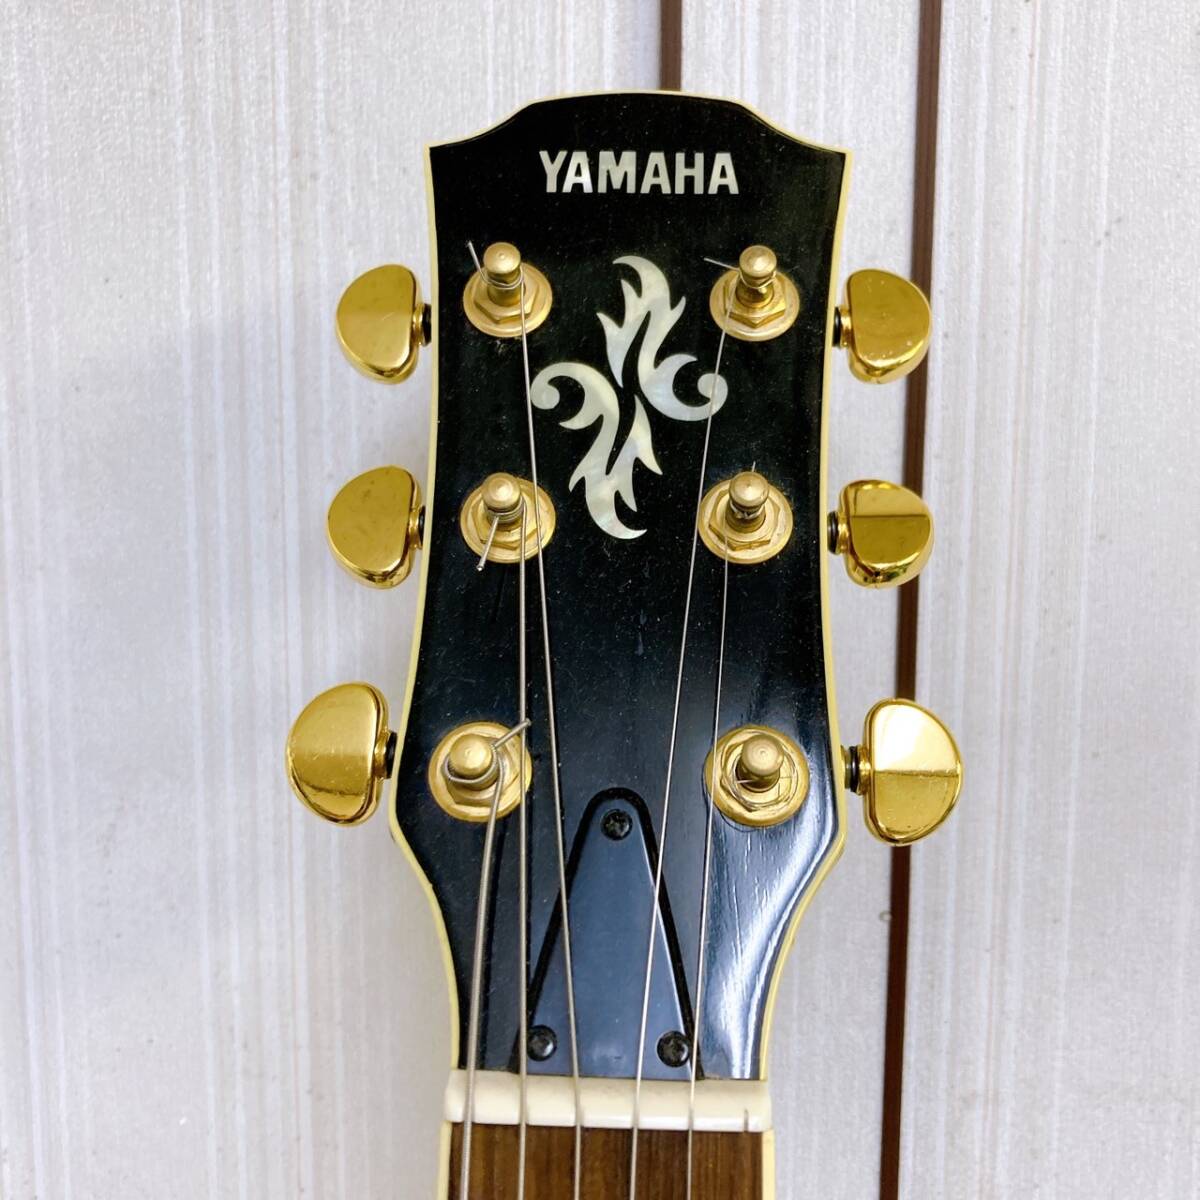 YAMAHA Yamaha APX-8 electric acoustic guitar electric acoustic guitar guitar acoustic guitar akogi musical instruments hard case attaching /YS1488- home 180